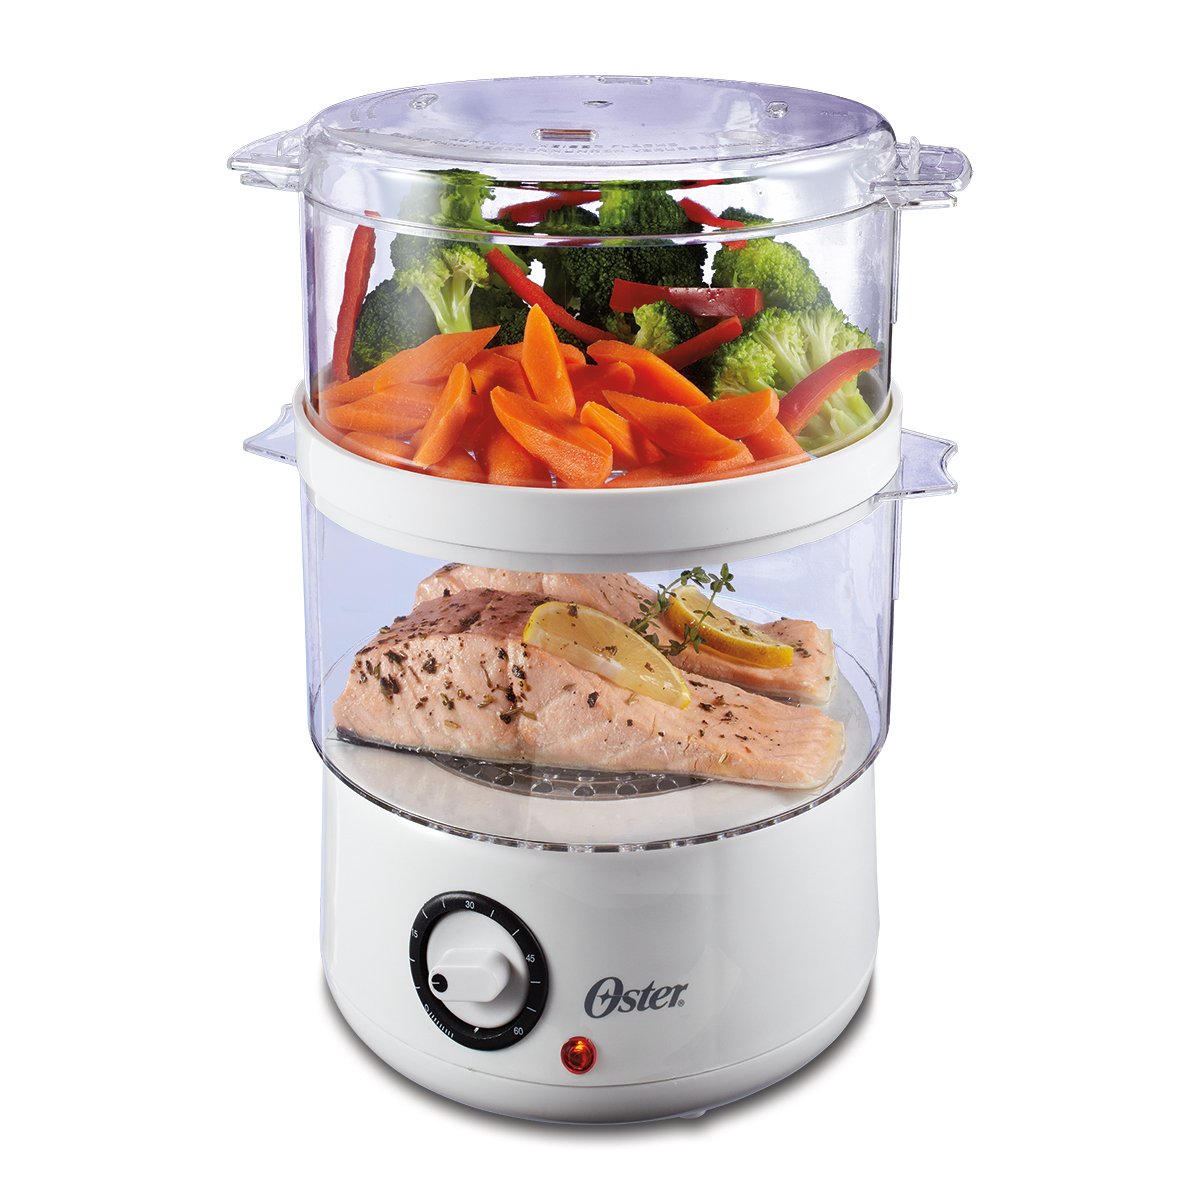 Amazon.com: Oster Double Tiered Food Steamer, 5 Quart, White